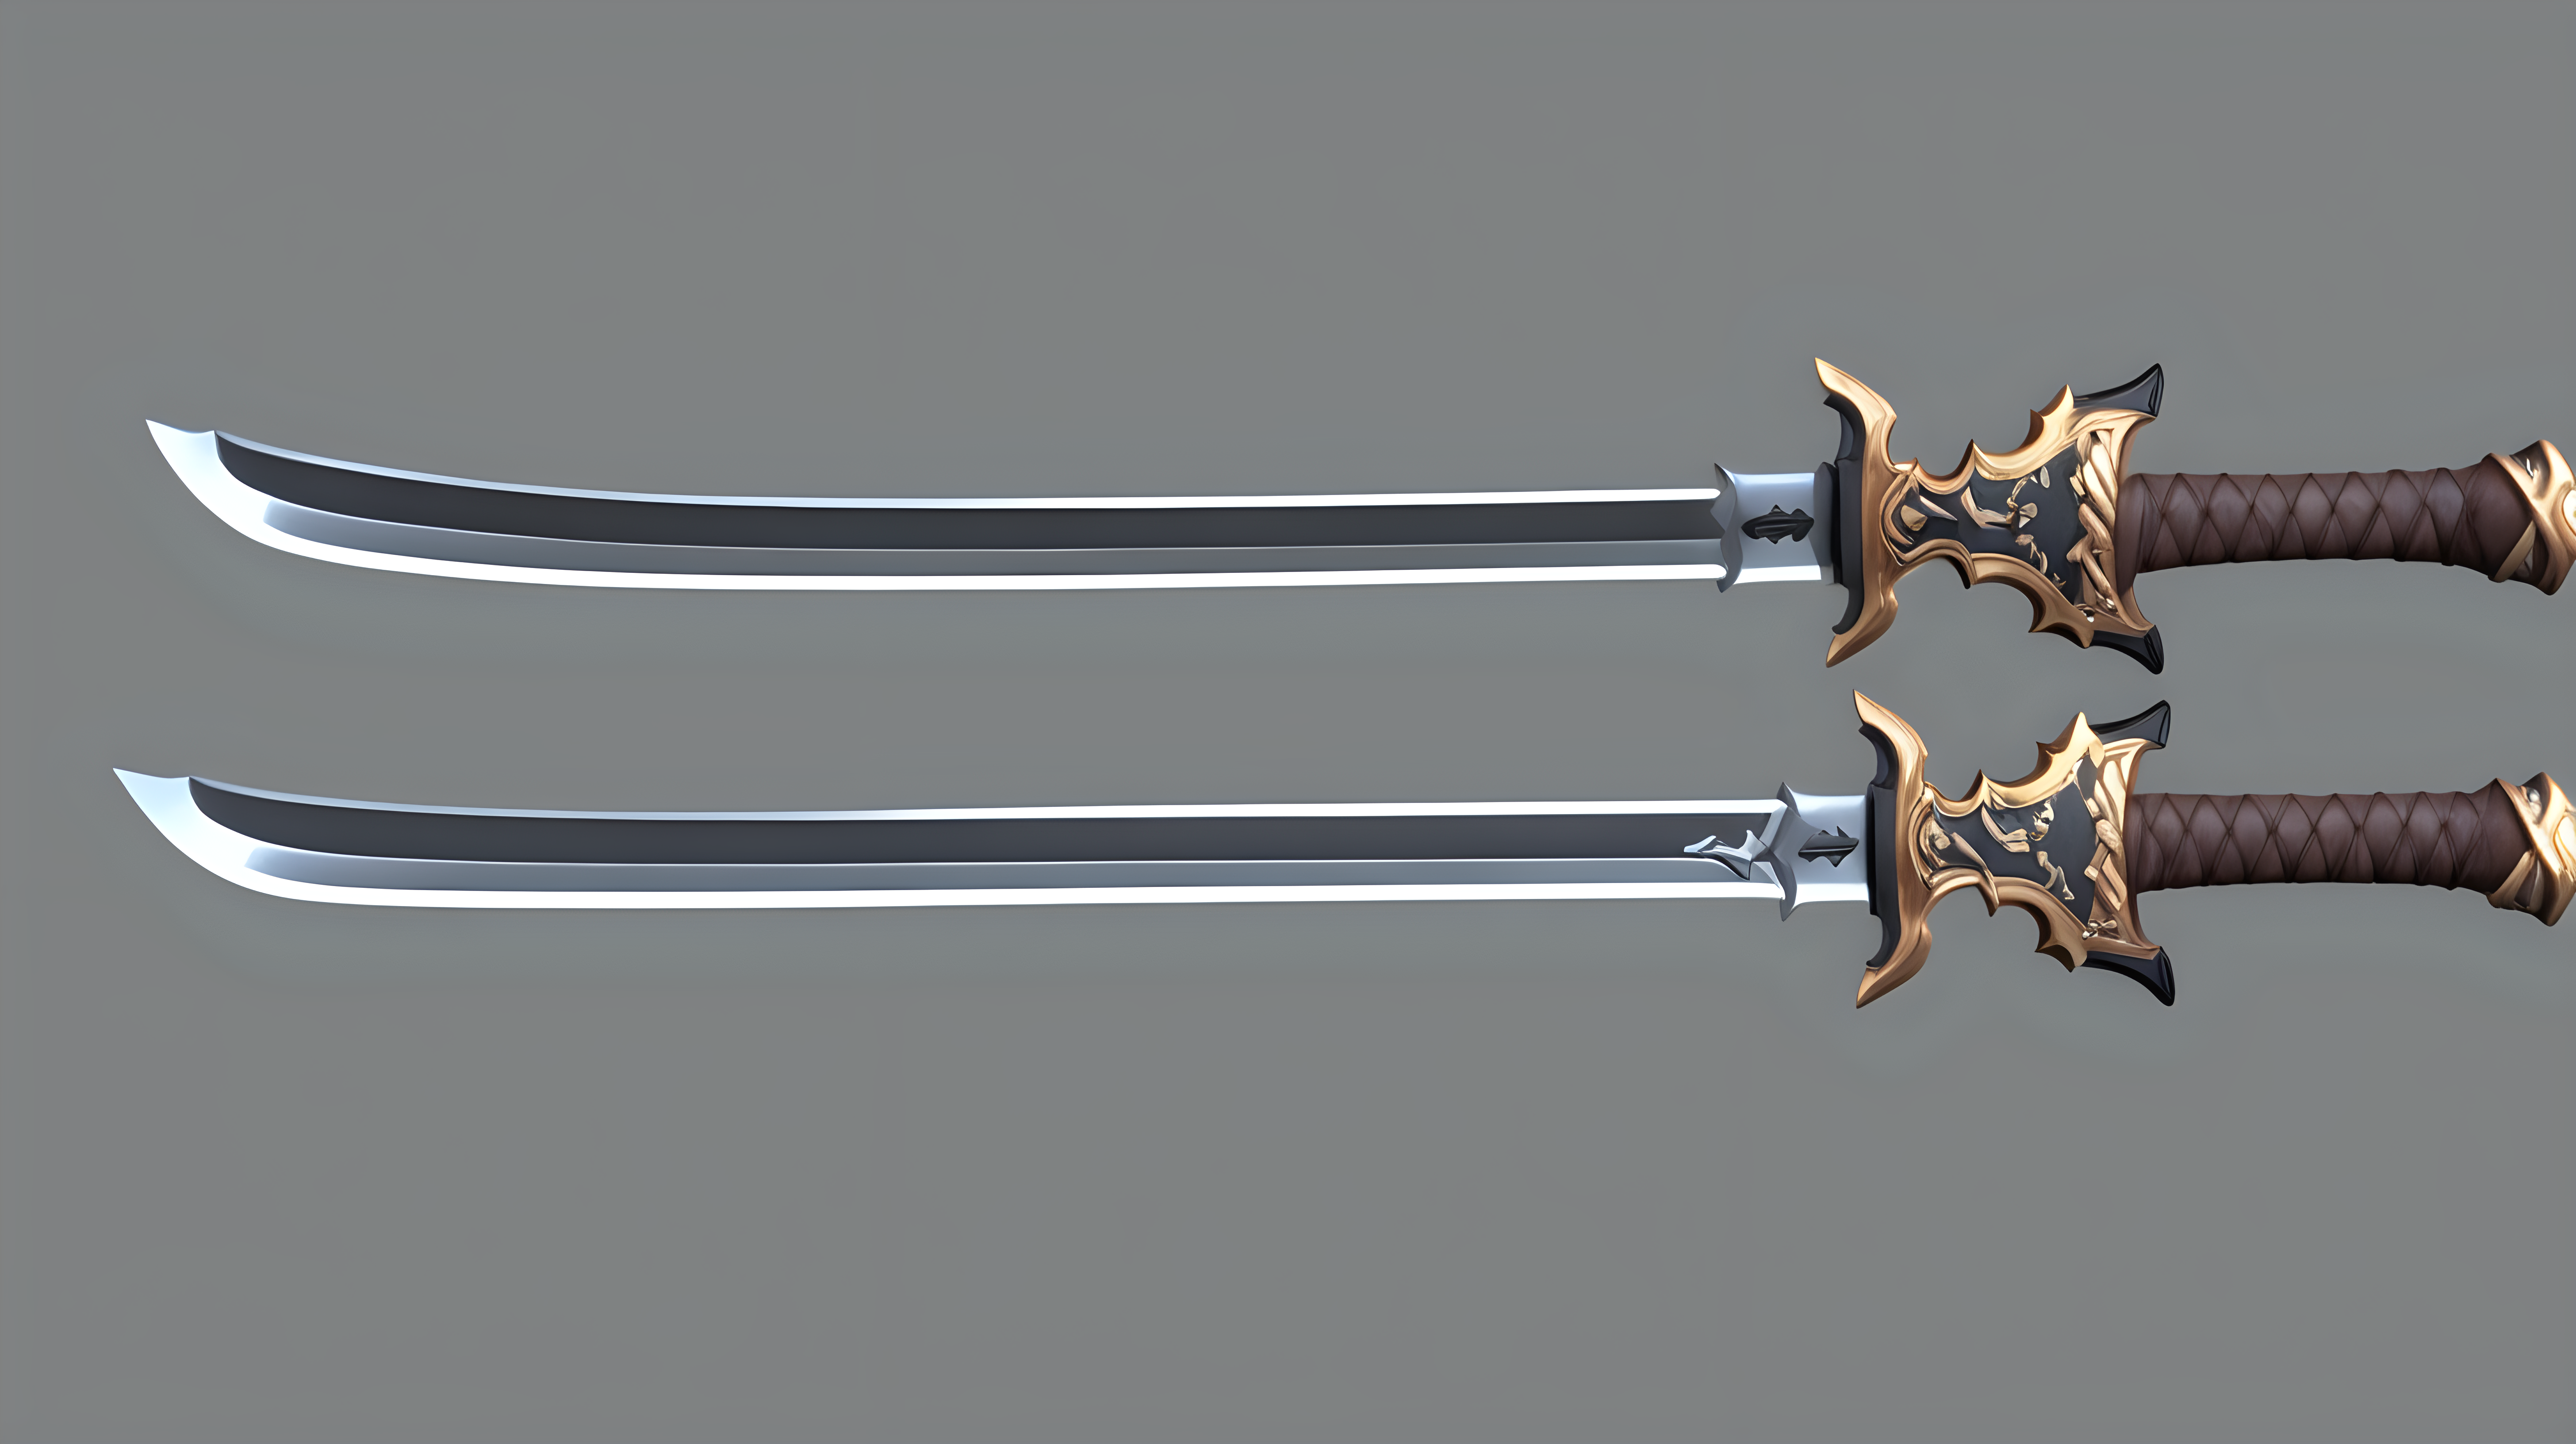 Model for a simple sword for a 3D survival MMORPG game in an anime style for Unity